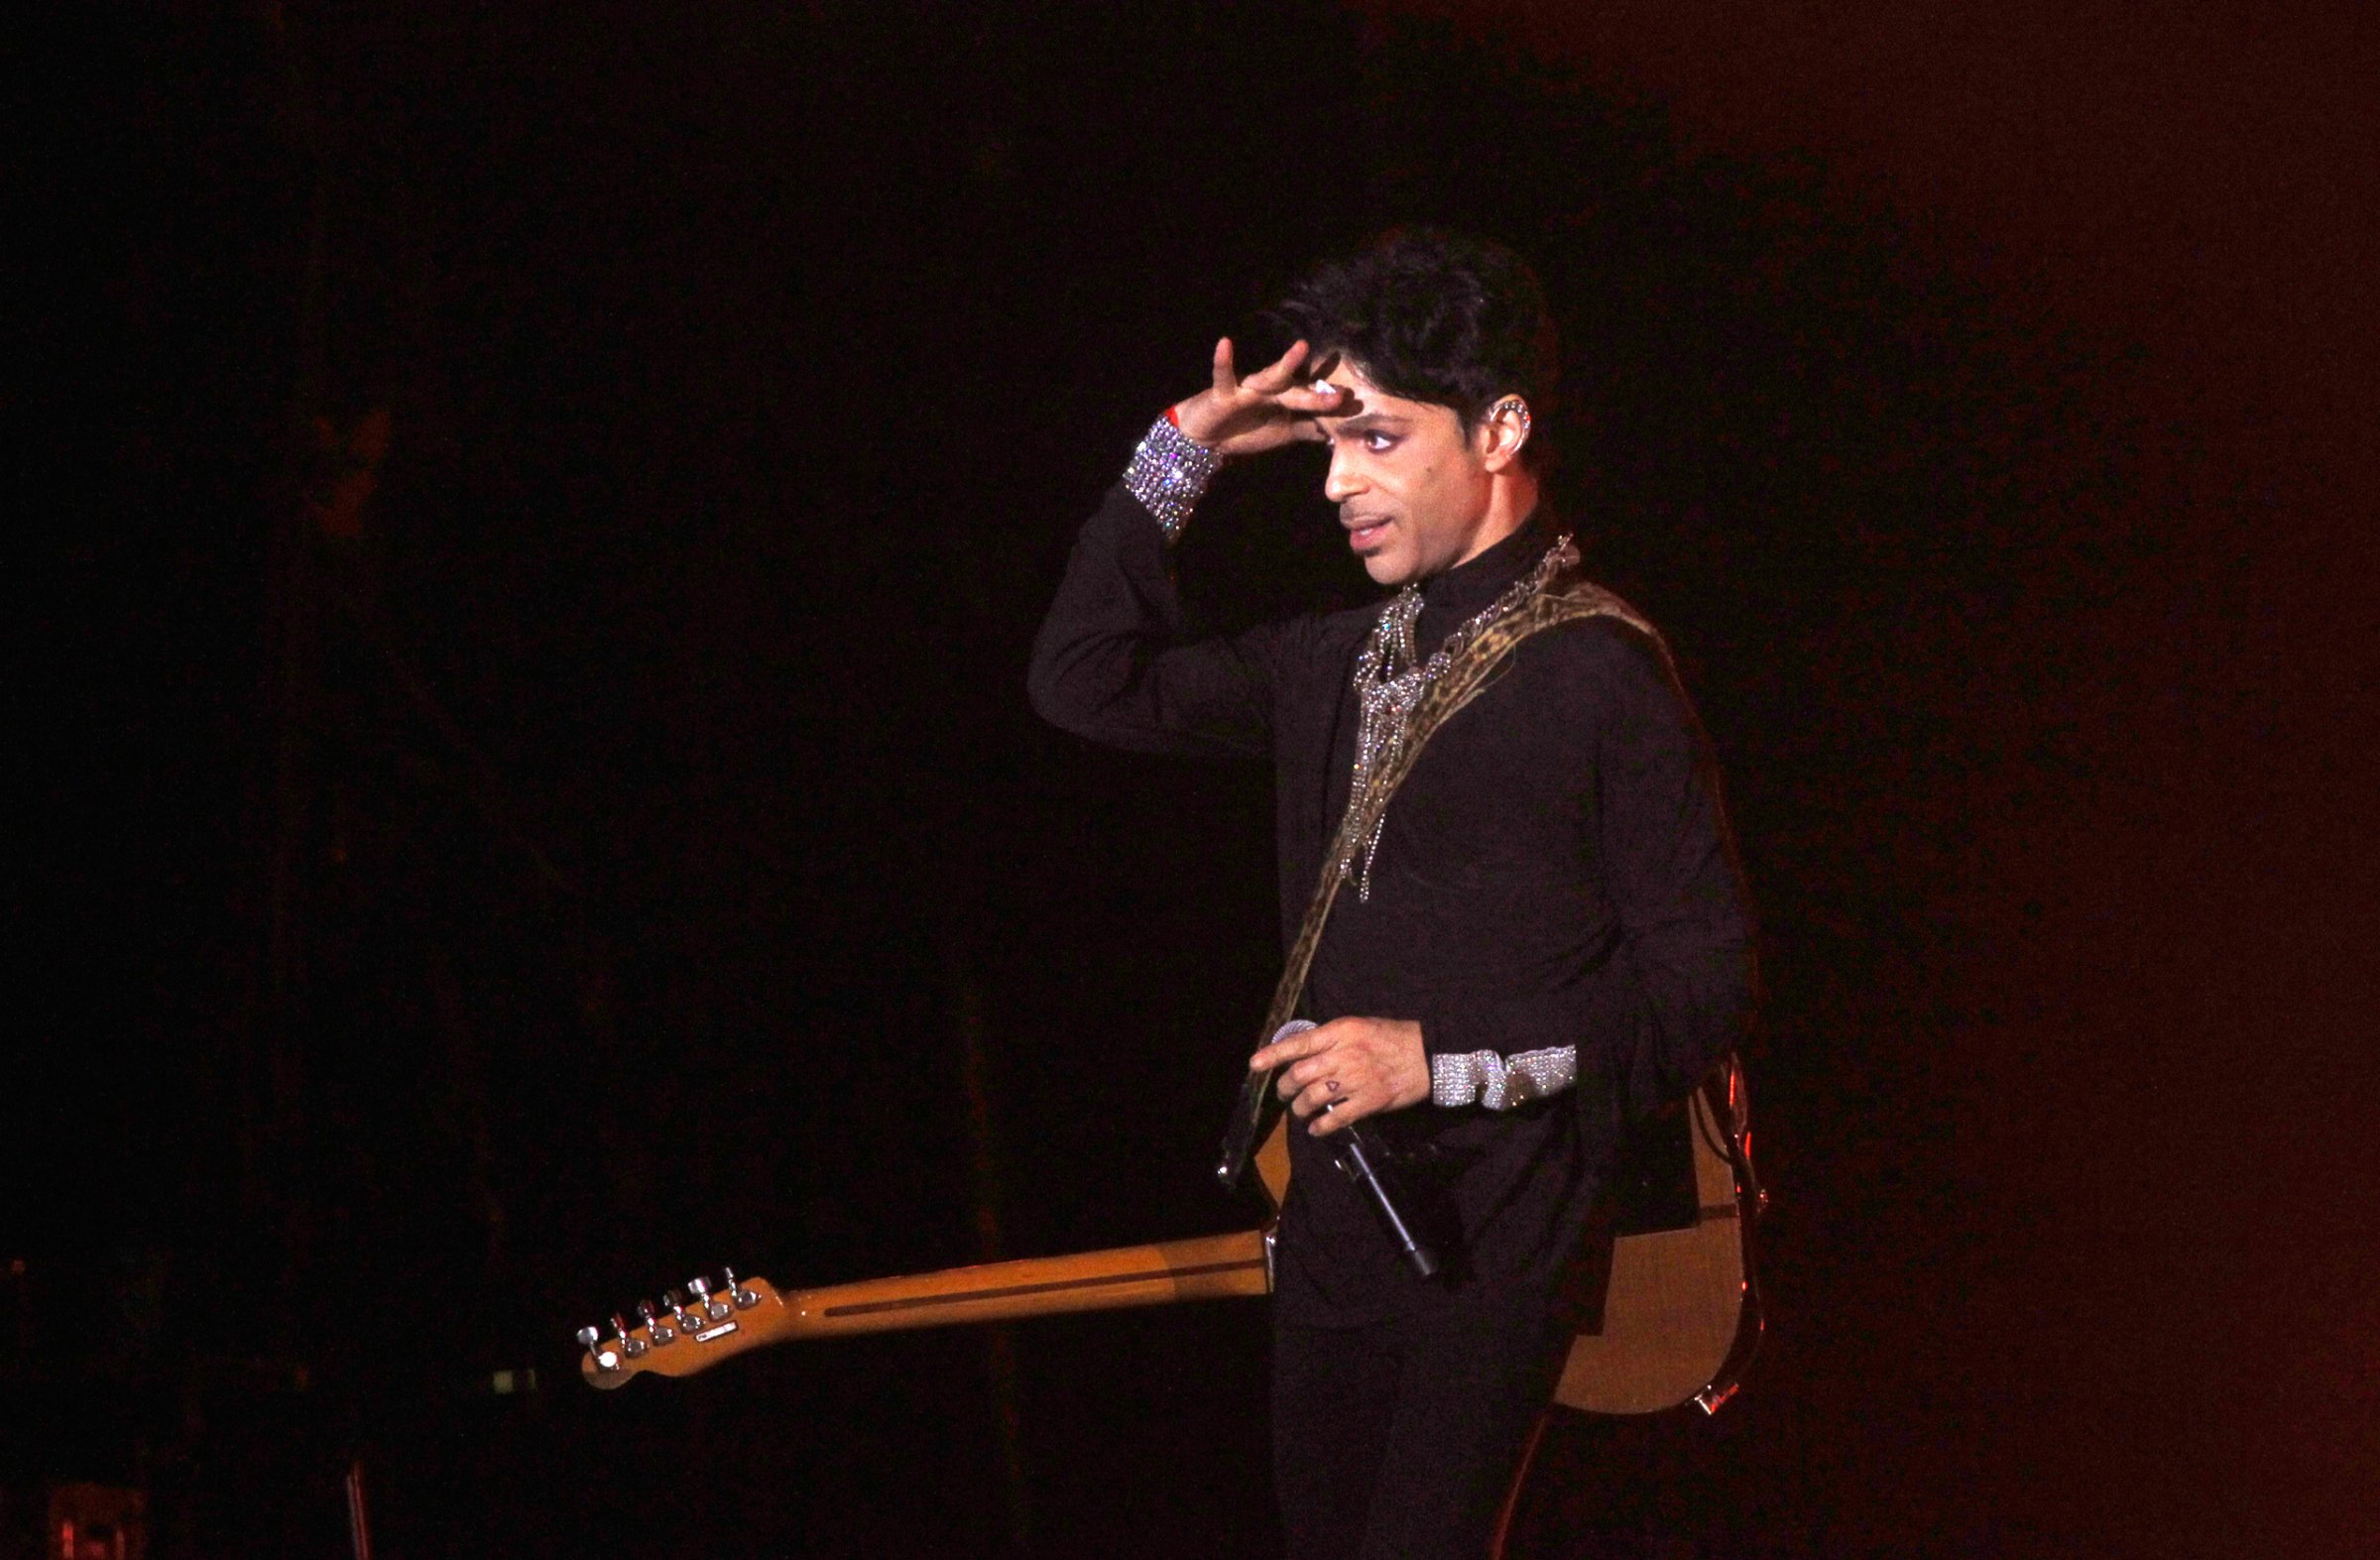 U.S. musician Prince performs on the main stage during Budapest's Sziget music festival on an island in the Danube River